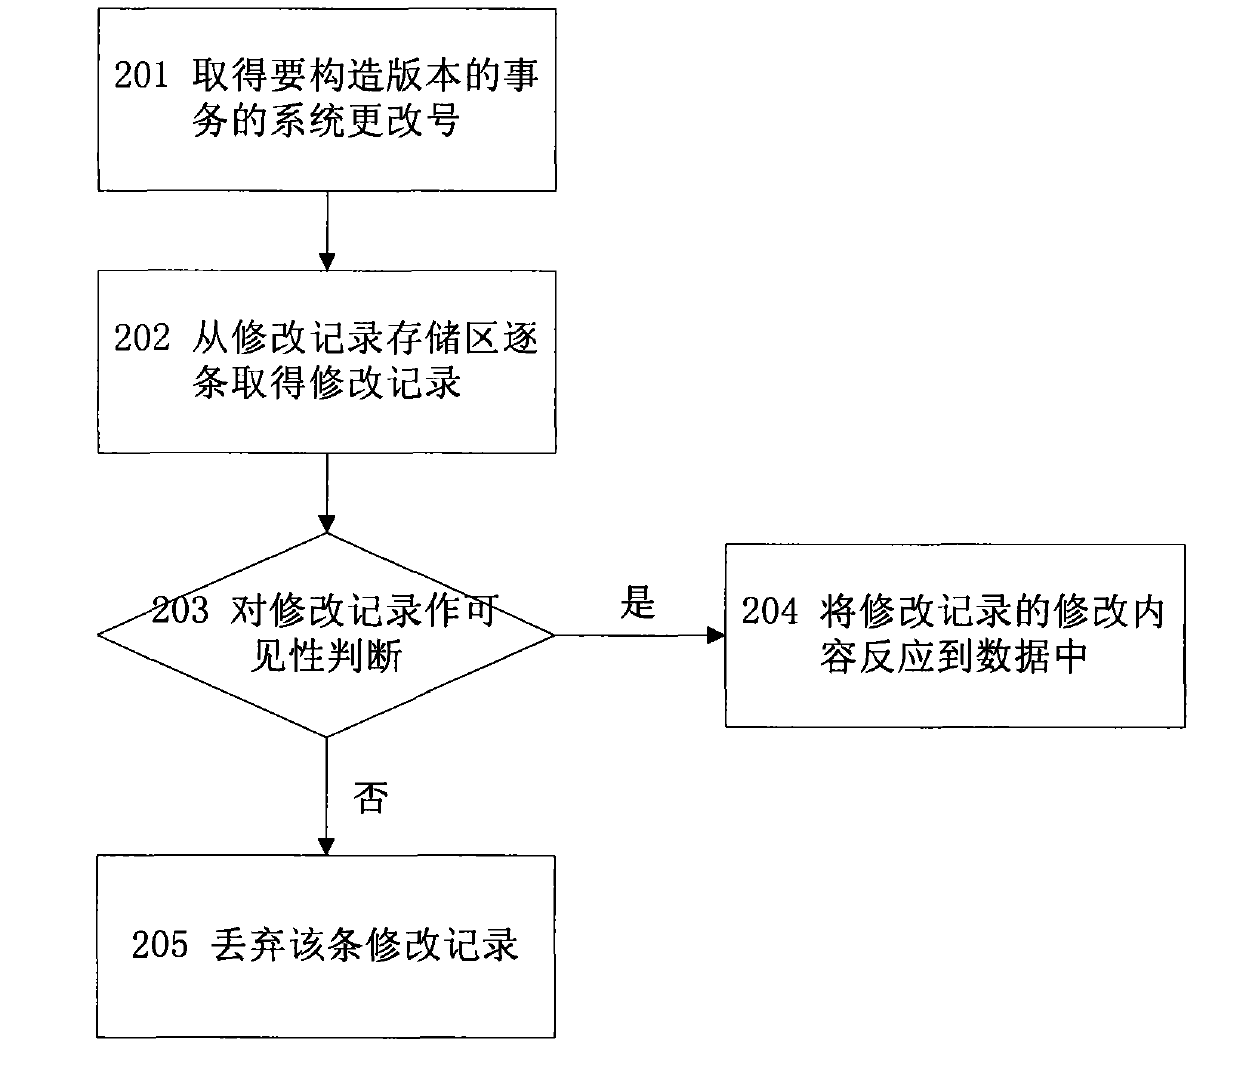 Multi-version database storage engine system and related processing implementation method thereof